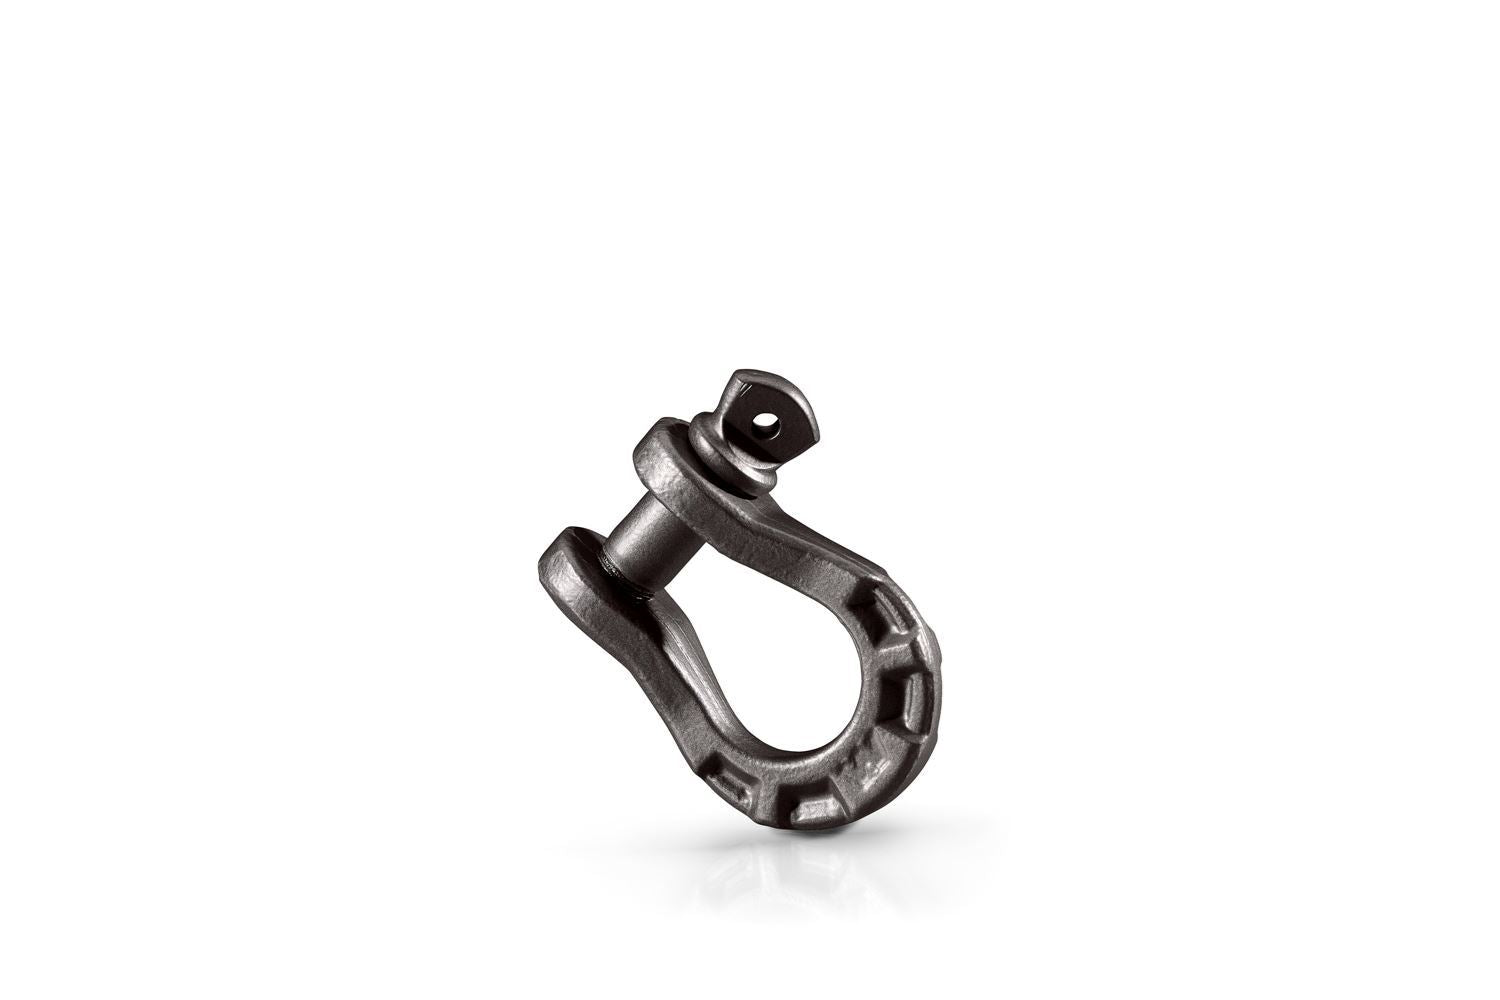 WARN Epic D-Ring Shackle, 1/2in